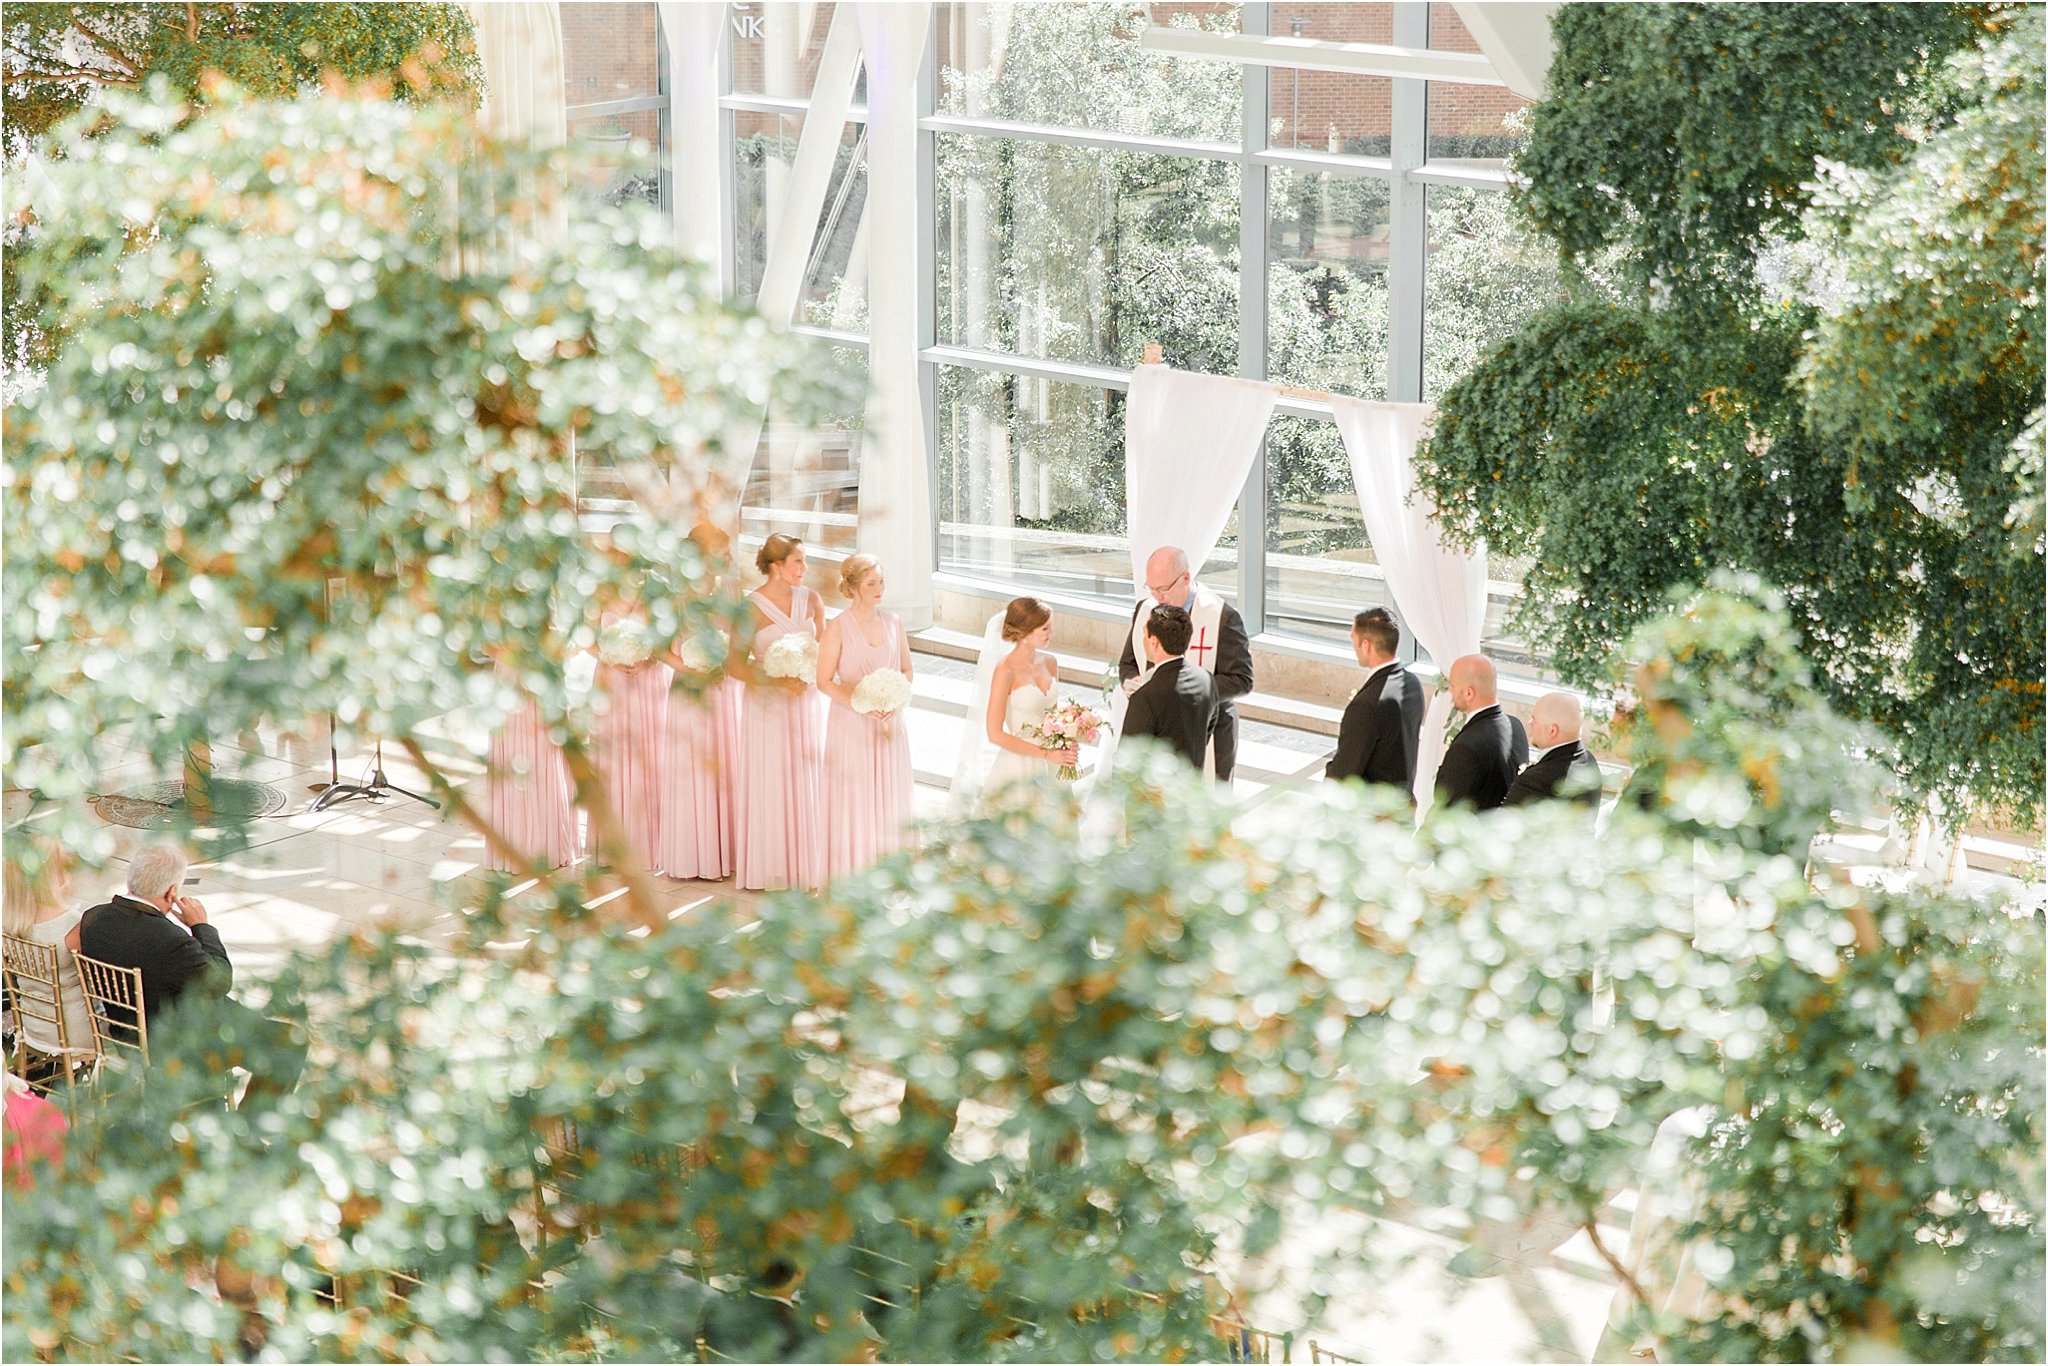 Indianapolis Wedding Venues For The